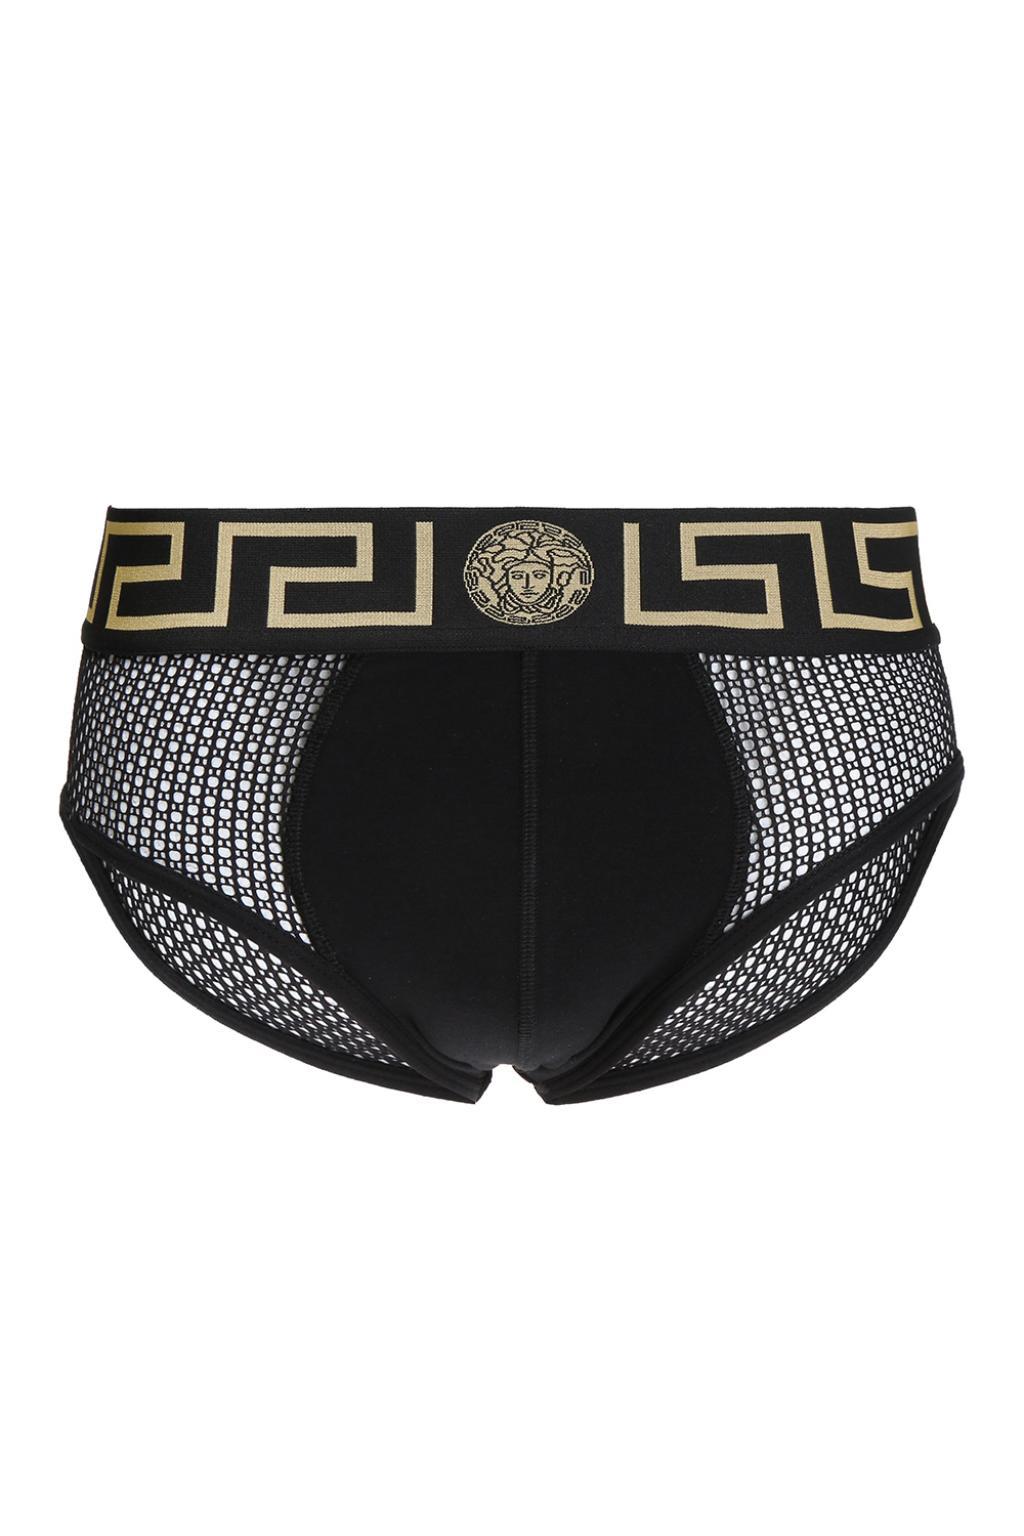 Versace Synthetic Mesh-trimmed Briefs in Black for Men - Lyst